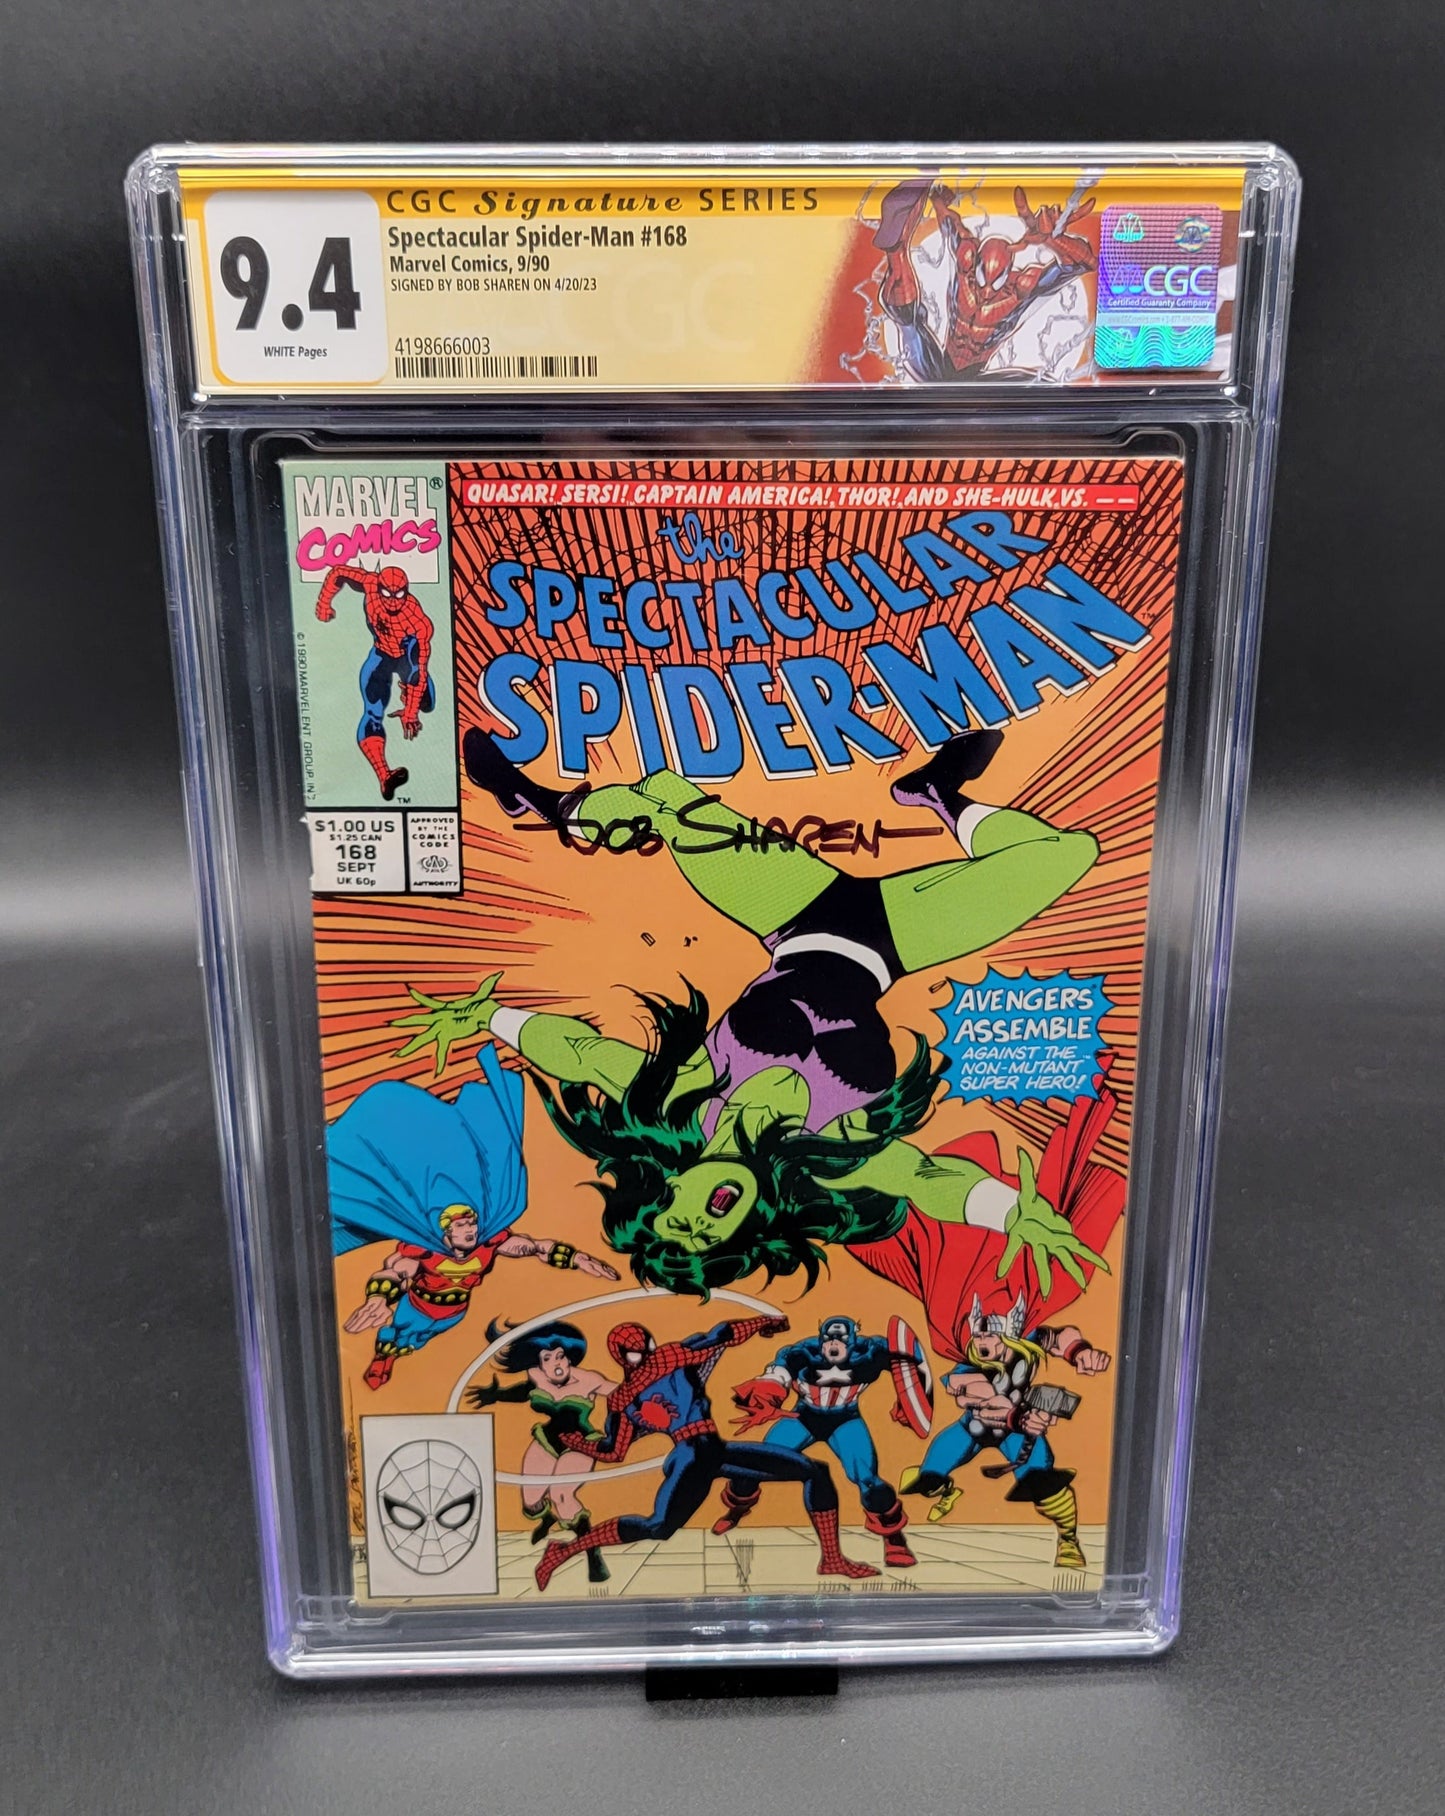 The Spectacular Spider-Man #168 1990 CGC SS 9.4 signed by Bob Sharen